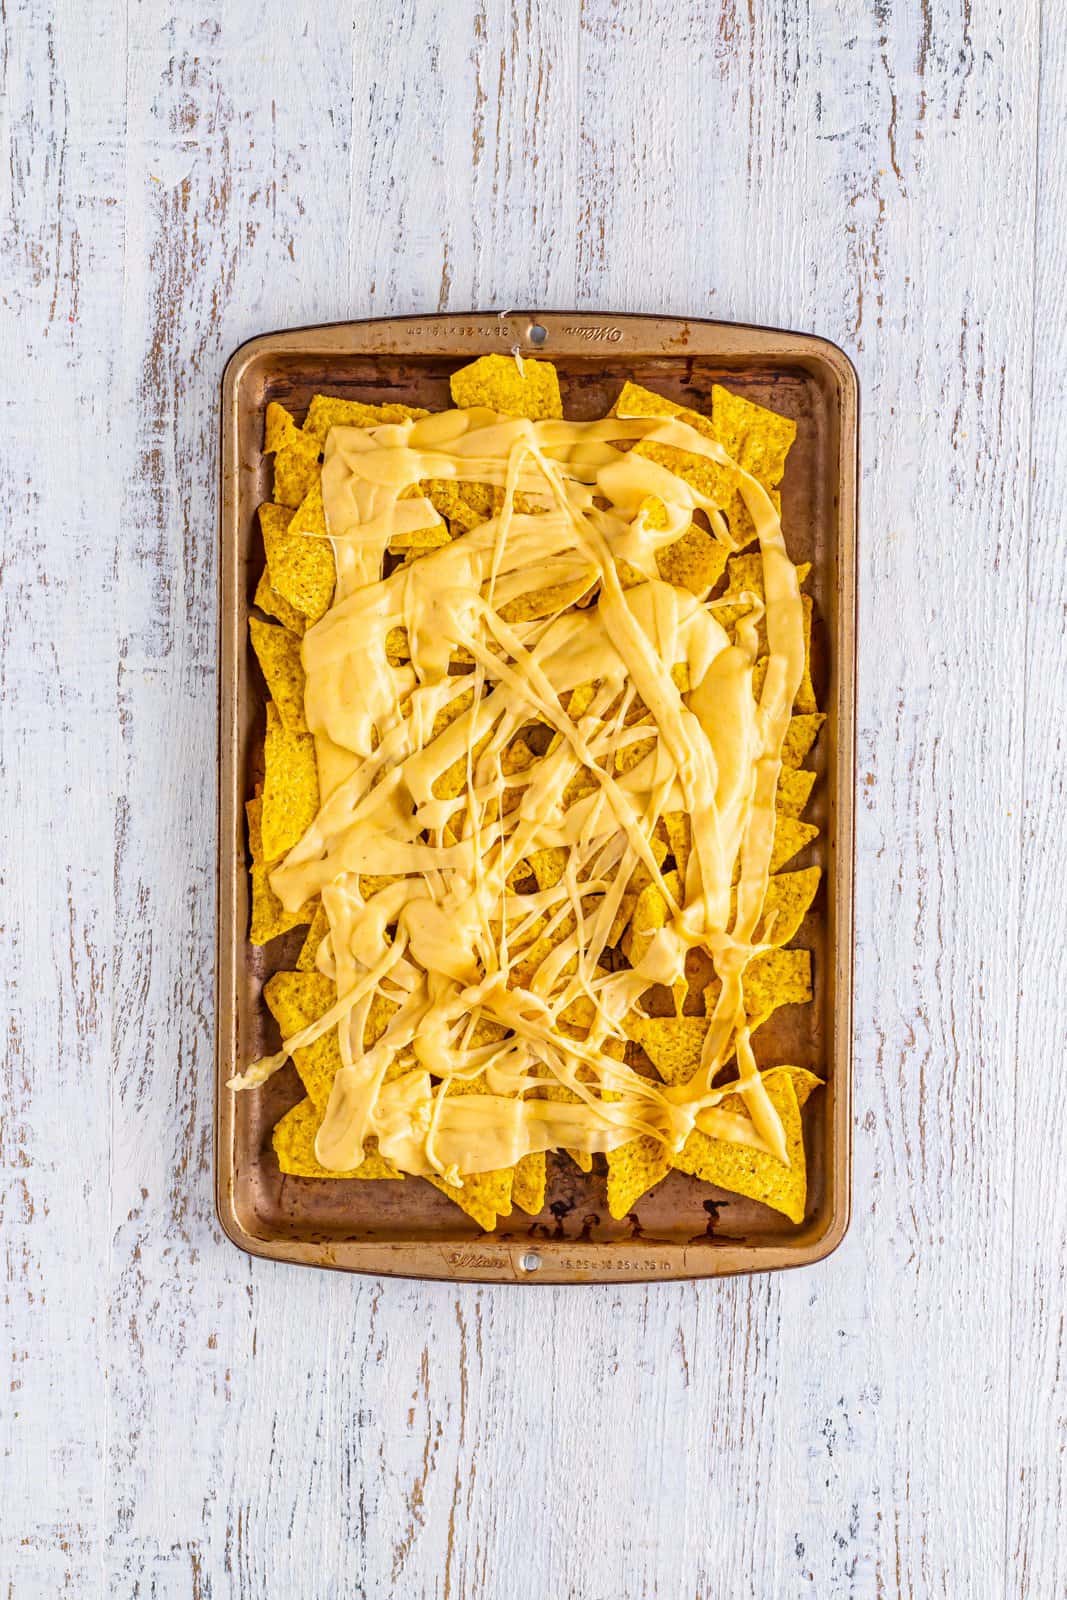 Tortilla chips with melted cheese sauce.